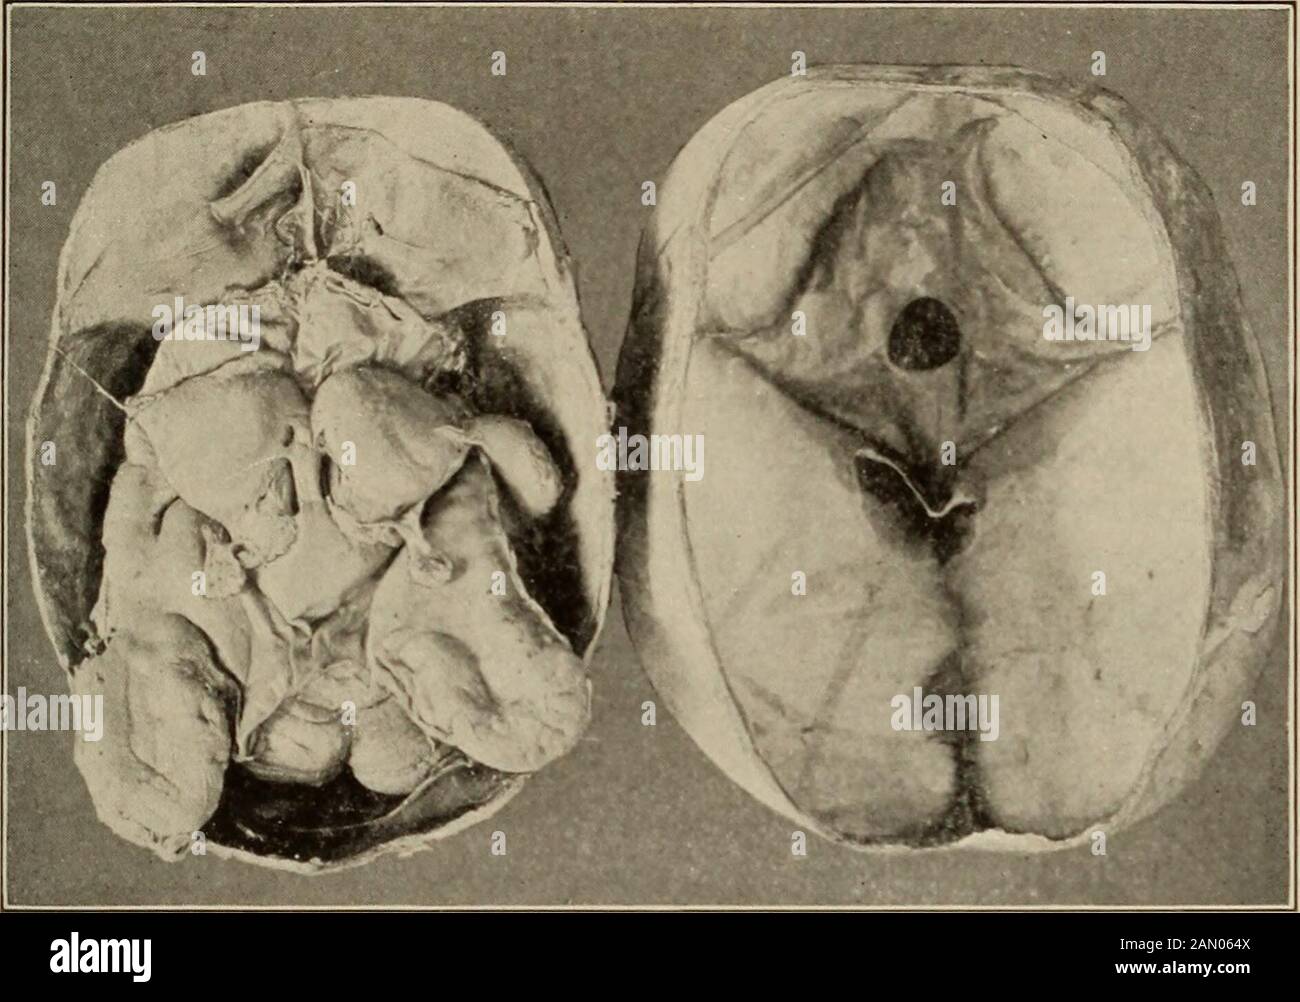 Nervous and mental diseases . ork Pathological Society. See Proceedings,1894, p. 94) : A female child, aged eighteen months; hydrocephalus, whether IDIOCY. 899 congenital or acquired unascertained. Circumference of head, 51.5 cm.;anteroposterior diameter, 18 cm. ; greatest transverse diameter, 15 cm.;naso-occipital arc, 32 cm. : binauricular arc, 34 cm. Blindness and nystagmus; widely gaping fontanels; spastic di-plegia ; occasional convulsions, and just before death opisthotonos.At the autopsy sixty-four ounces of reddish serum were first removedby tapping the anterior fontanel. The skull and Stock Photo